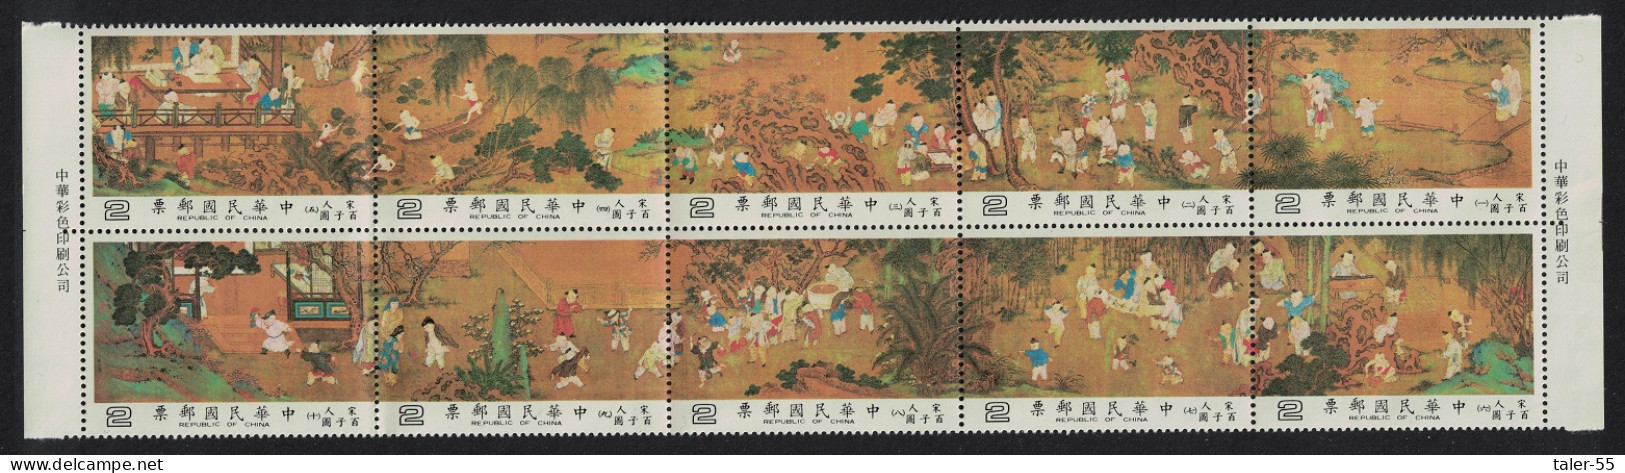 Taiwan Sung Dynasty Painting 'One Hundred Young Boys' 10v T2 1981 MNH SG#1403-1412 - Ungebraucht